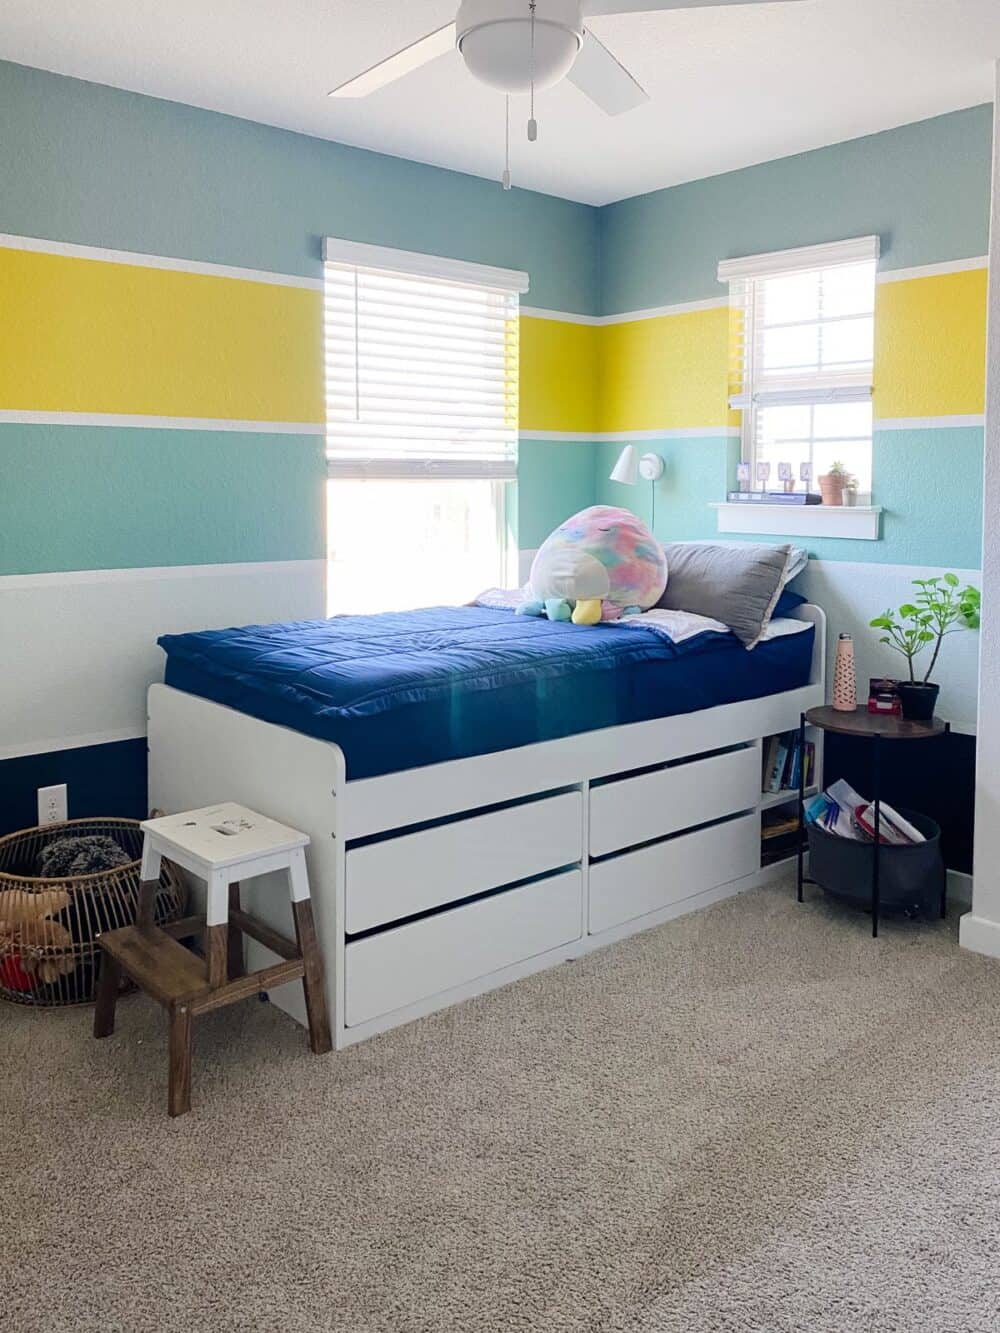 A bright and colorful kid bedroom with striped walls 